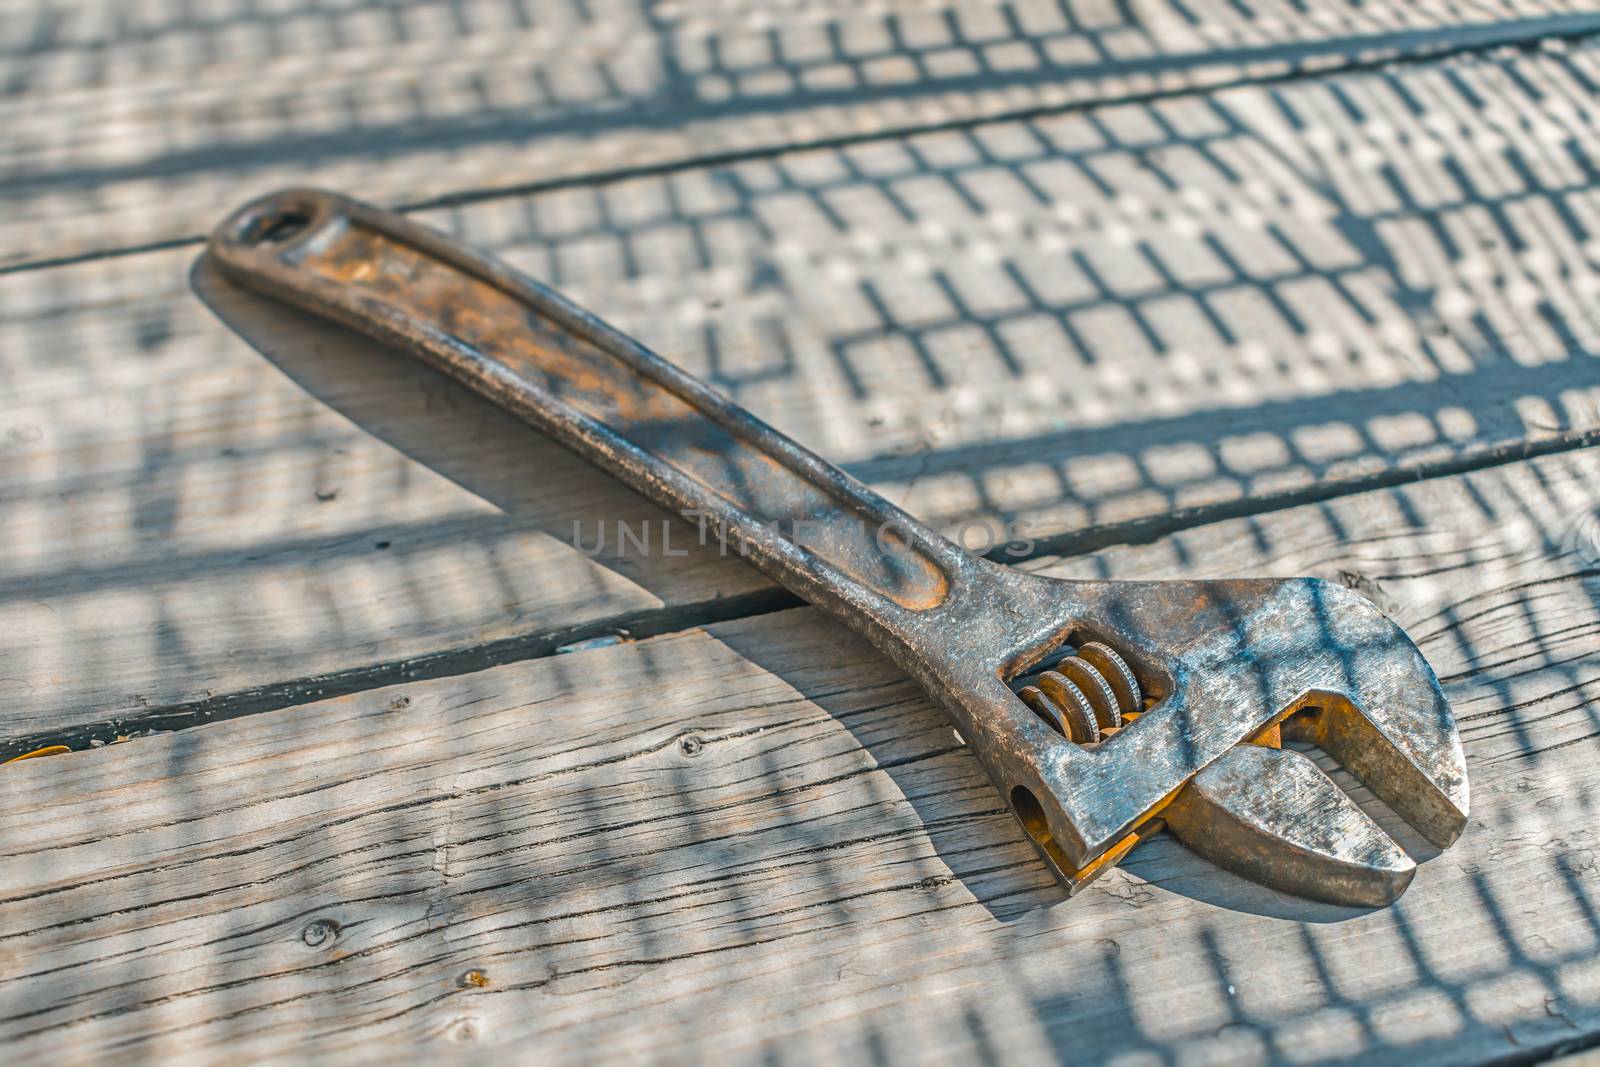 A rusty steel adjustable wrench lies on an old wooden floor